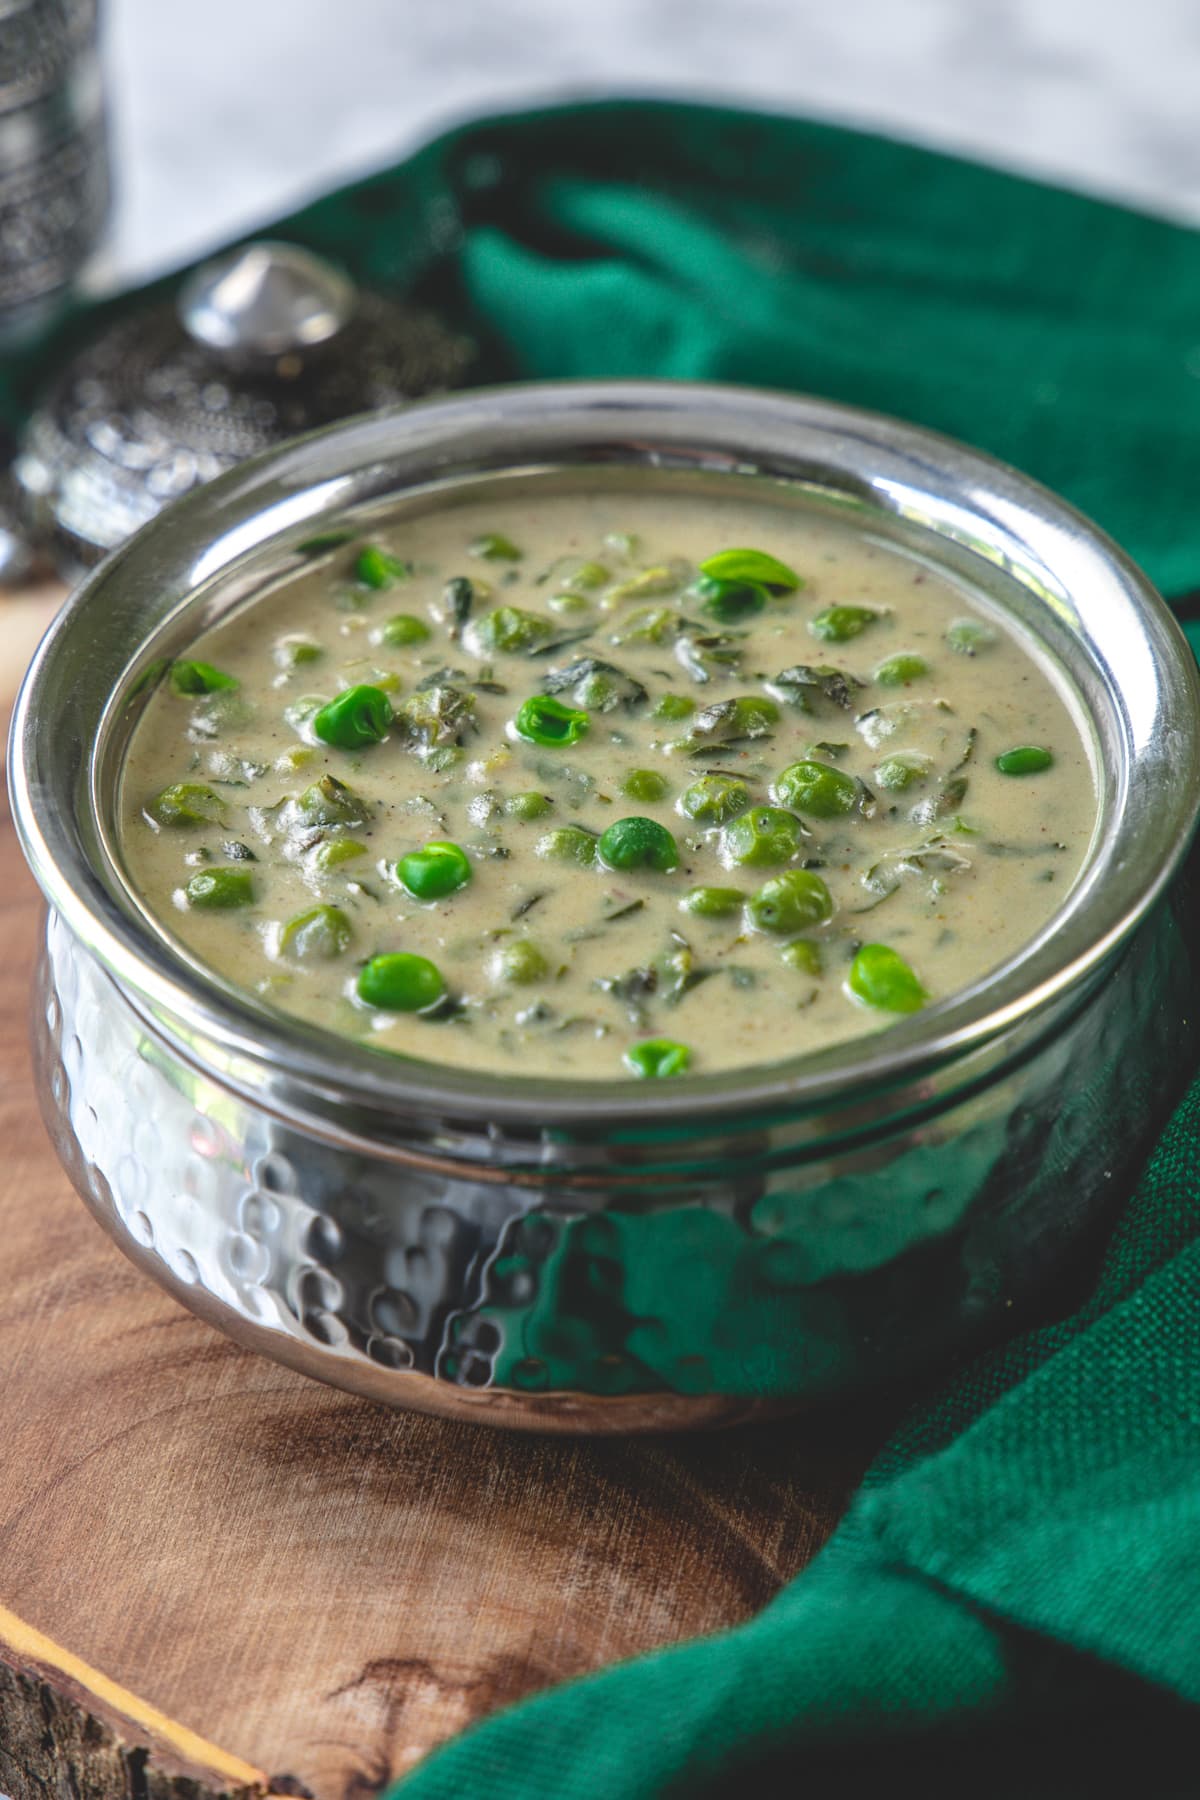 Methi matar malai in a steel serving bowl with green napkin on side.